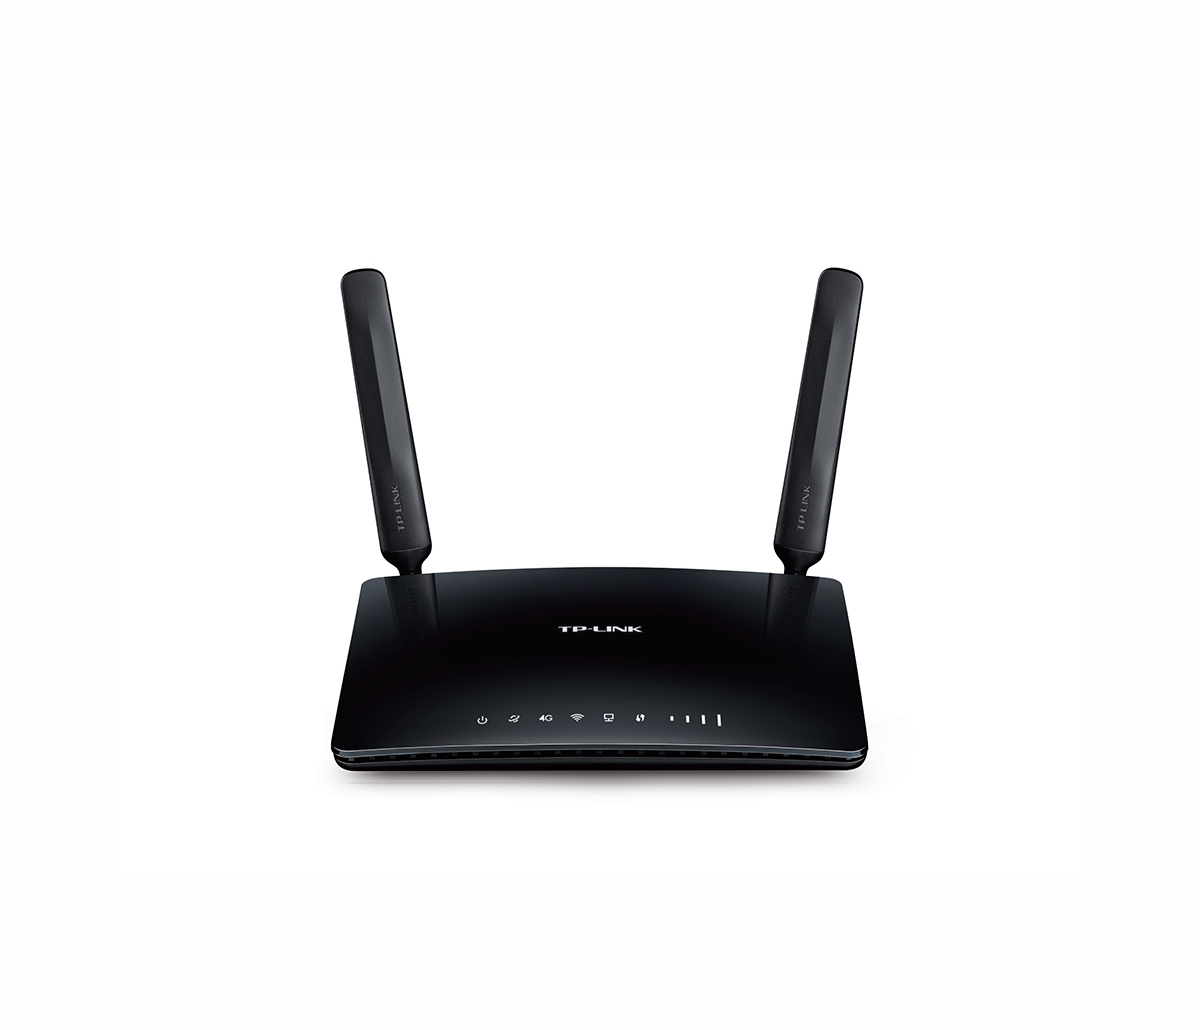 Wireless router TP-LINK TL-MR6400